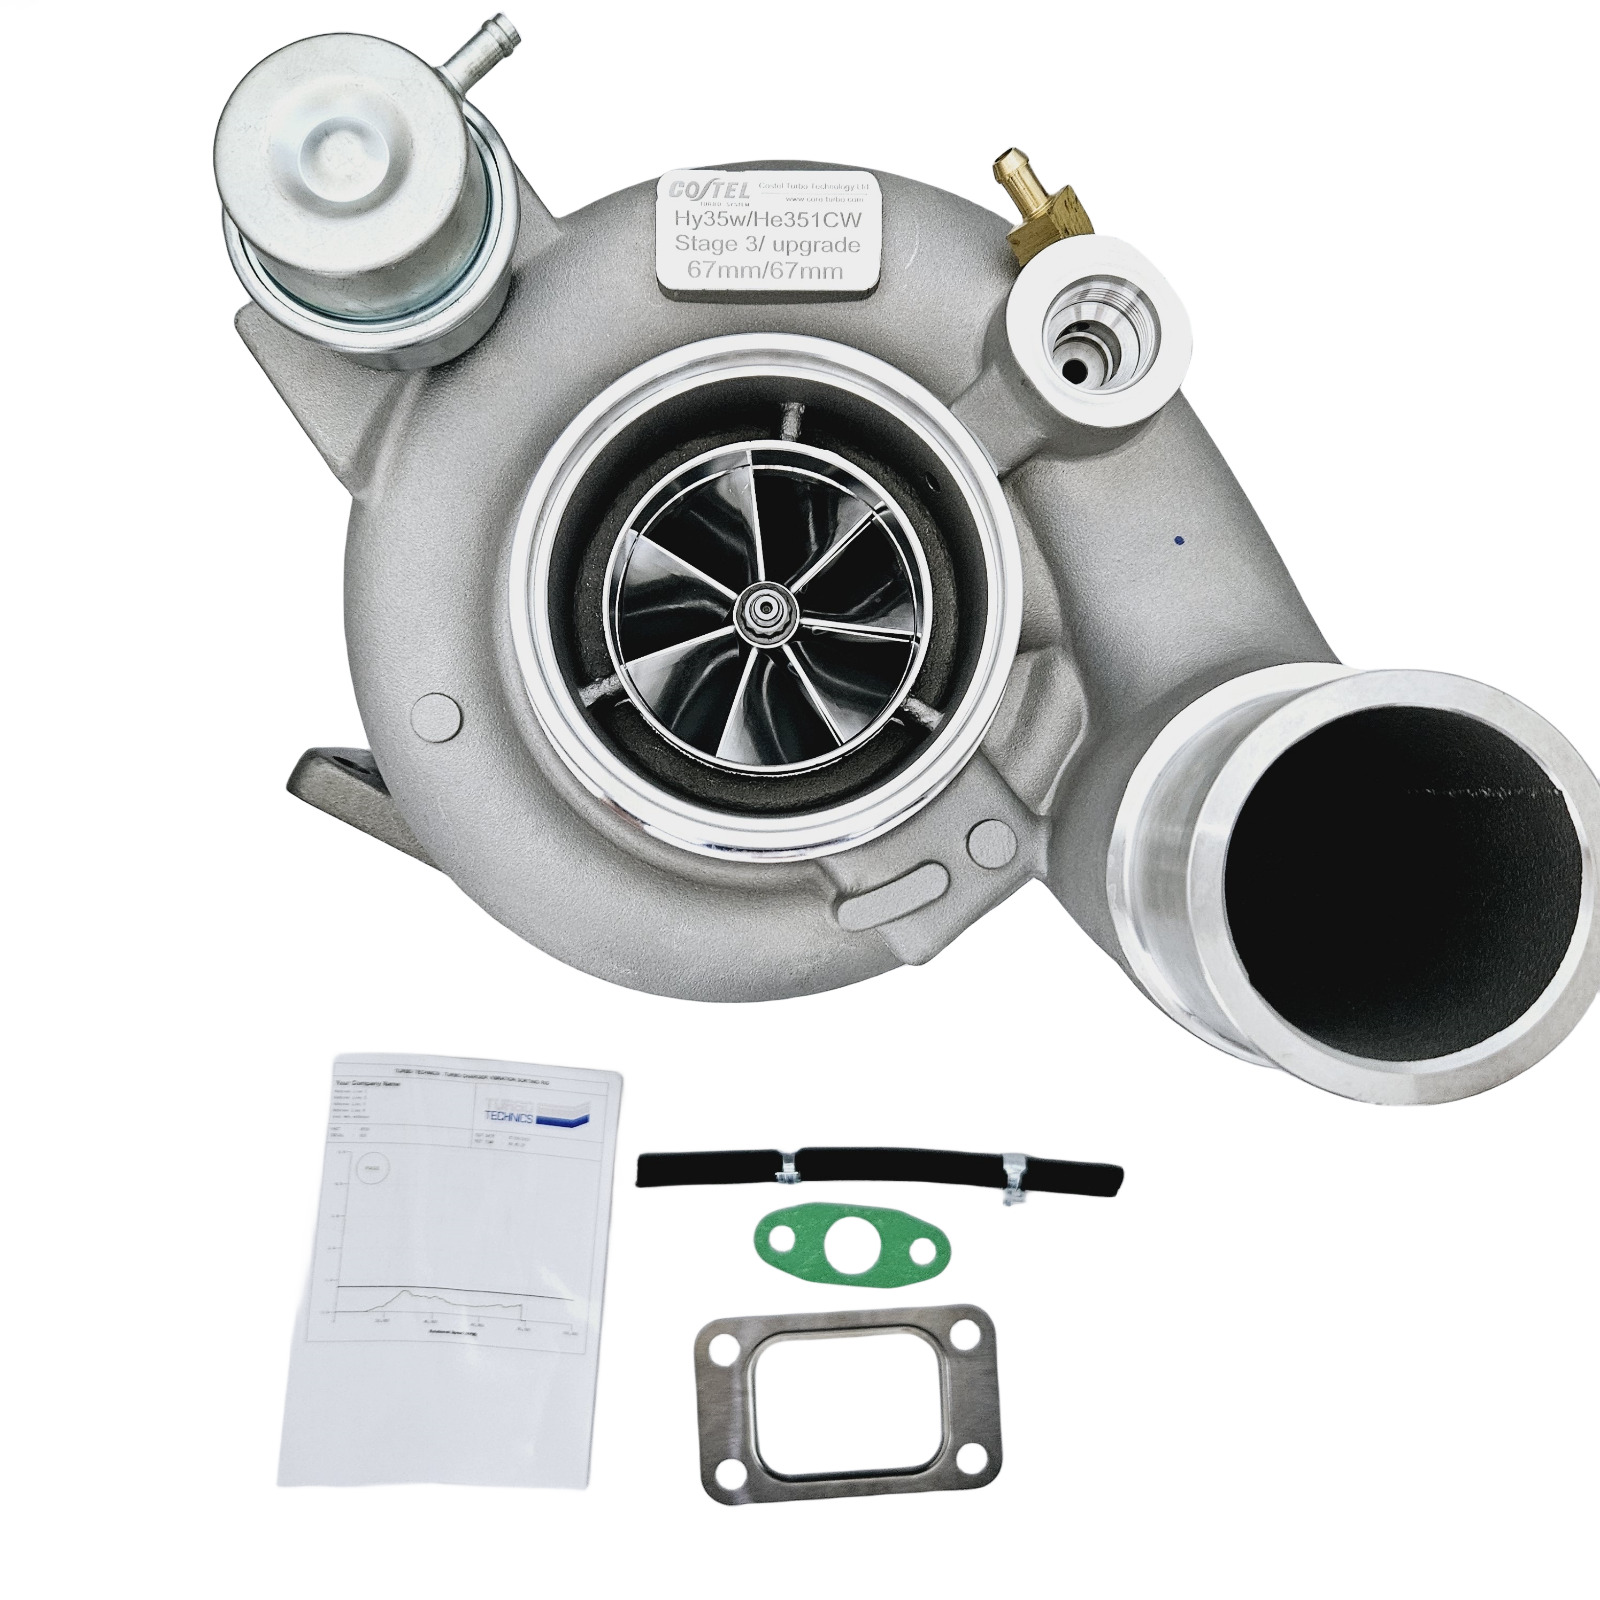 Stage 3 HE351CW Upgrade Turbo for 2004-2007 Dodge Ram 5.9L 67mm89mm wheel